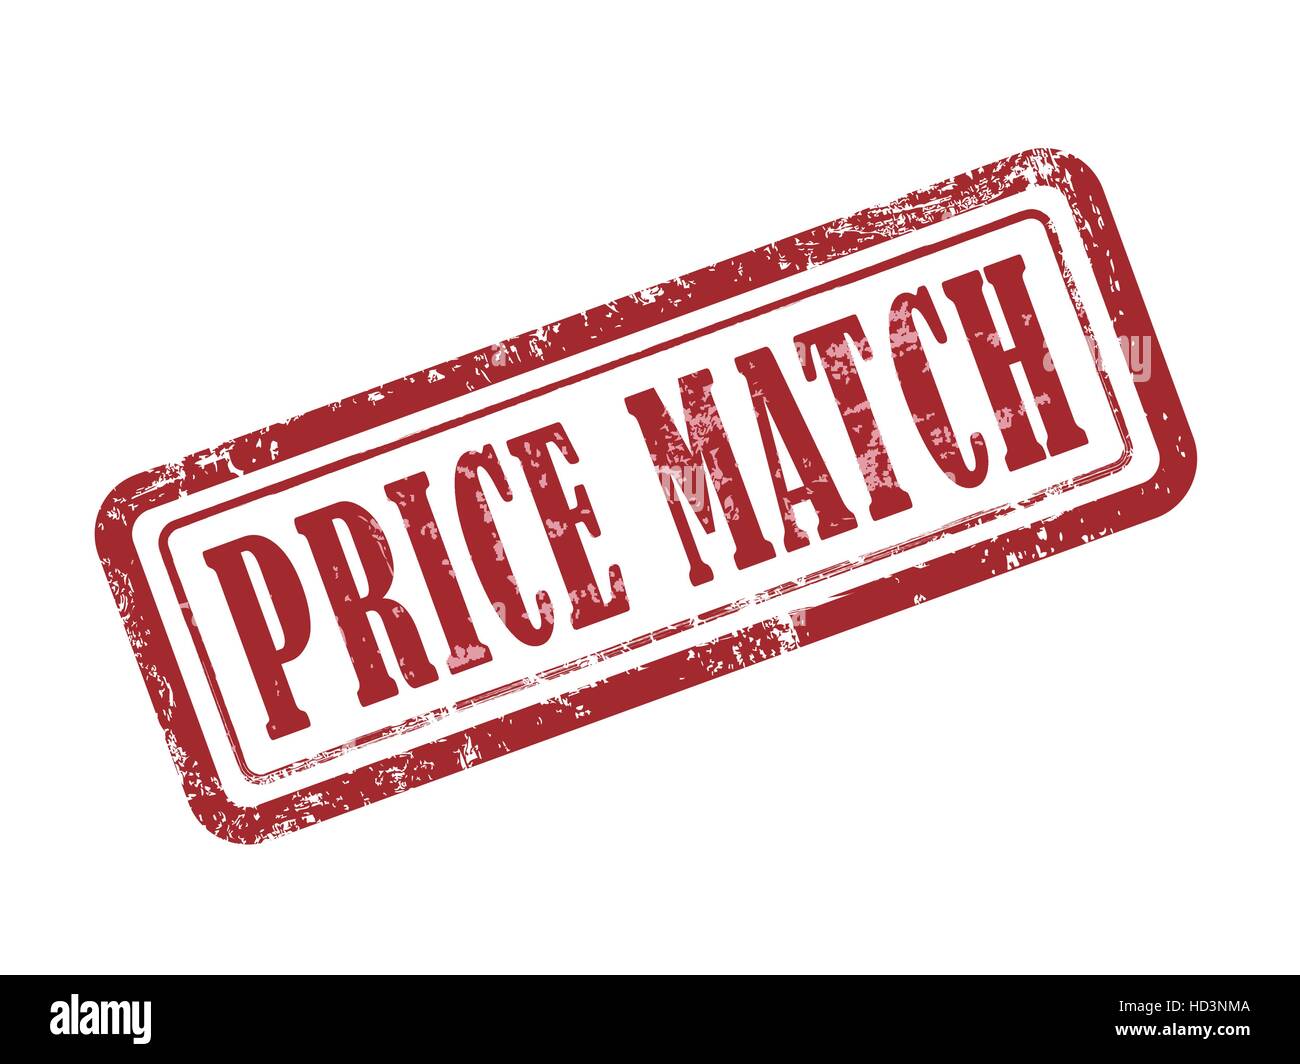 stamp-price-match-in-red-over-white-background-stock-vector-image-art